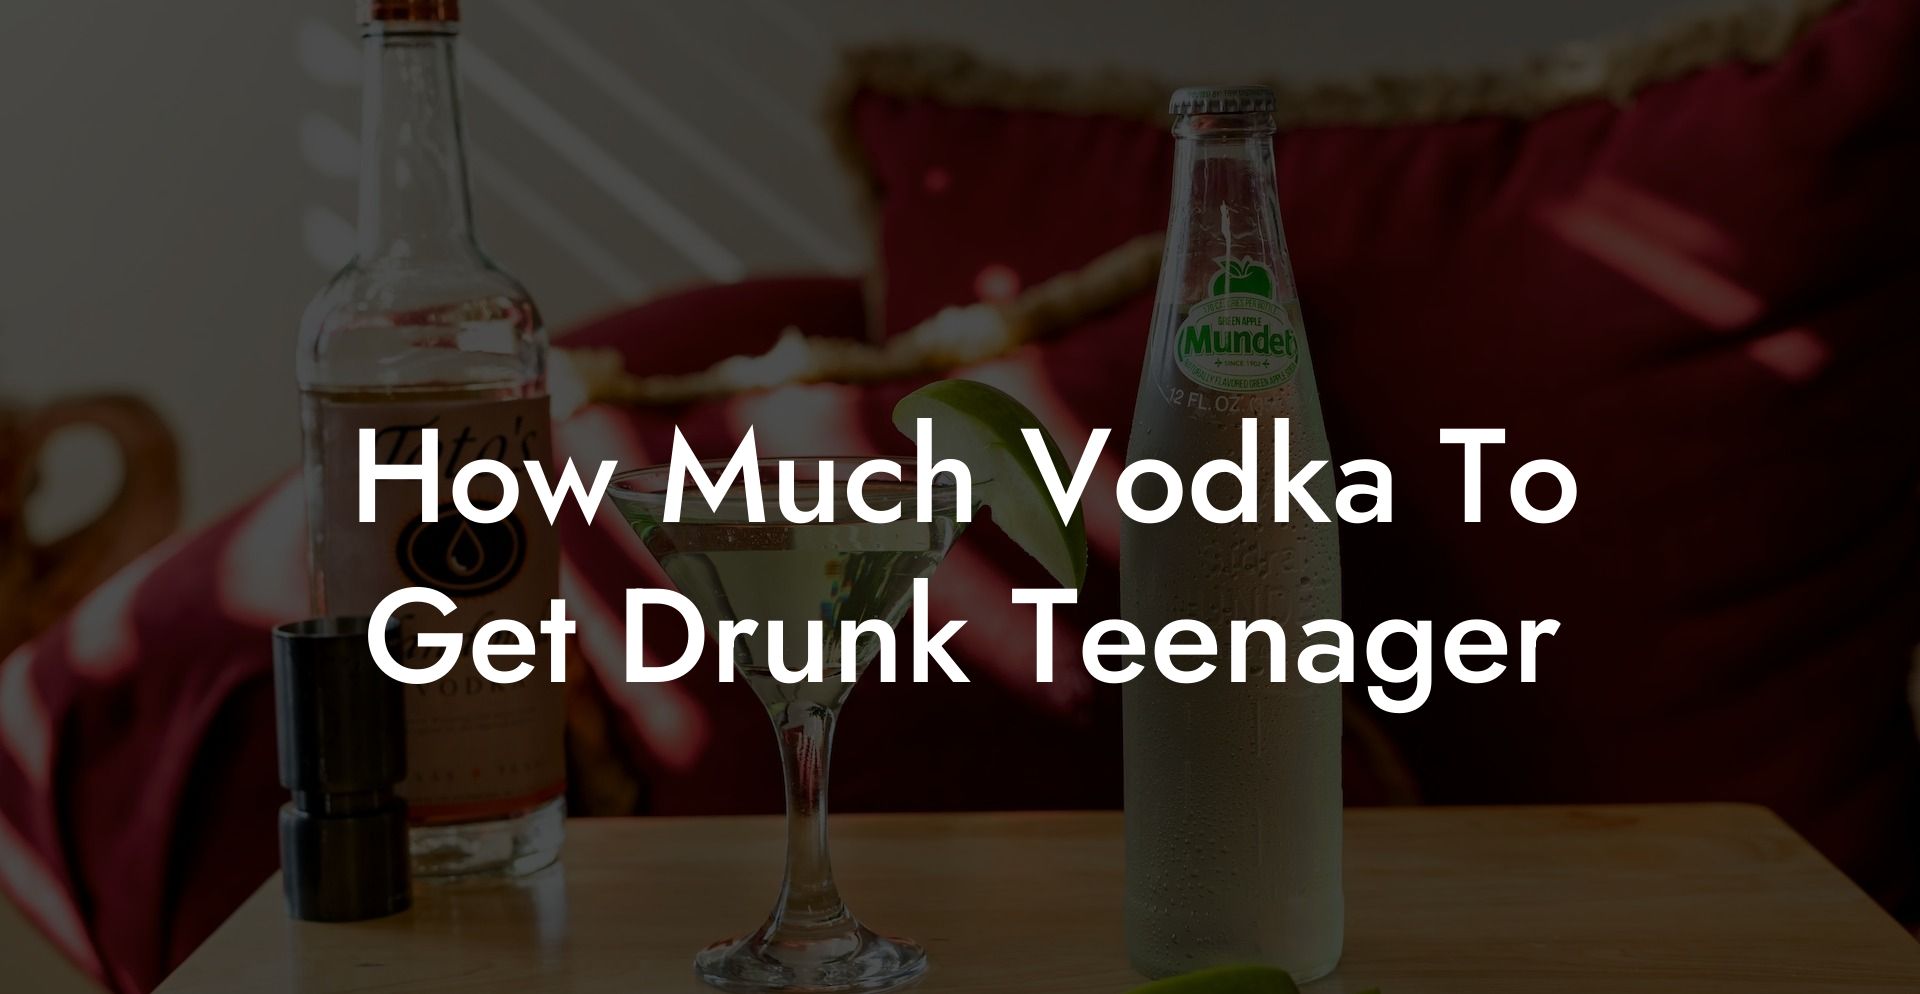 How Much Vodka To Get Drunk Teenager